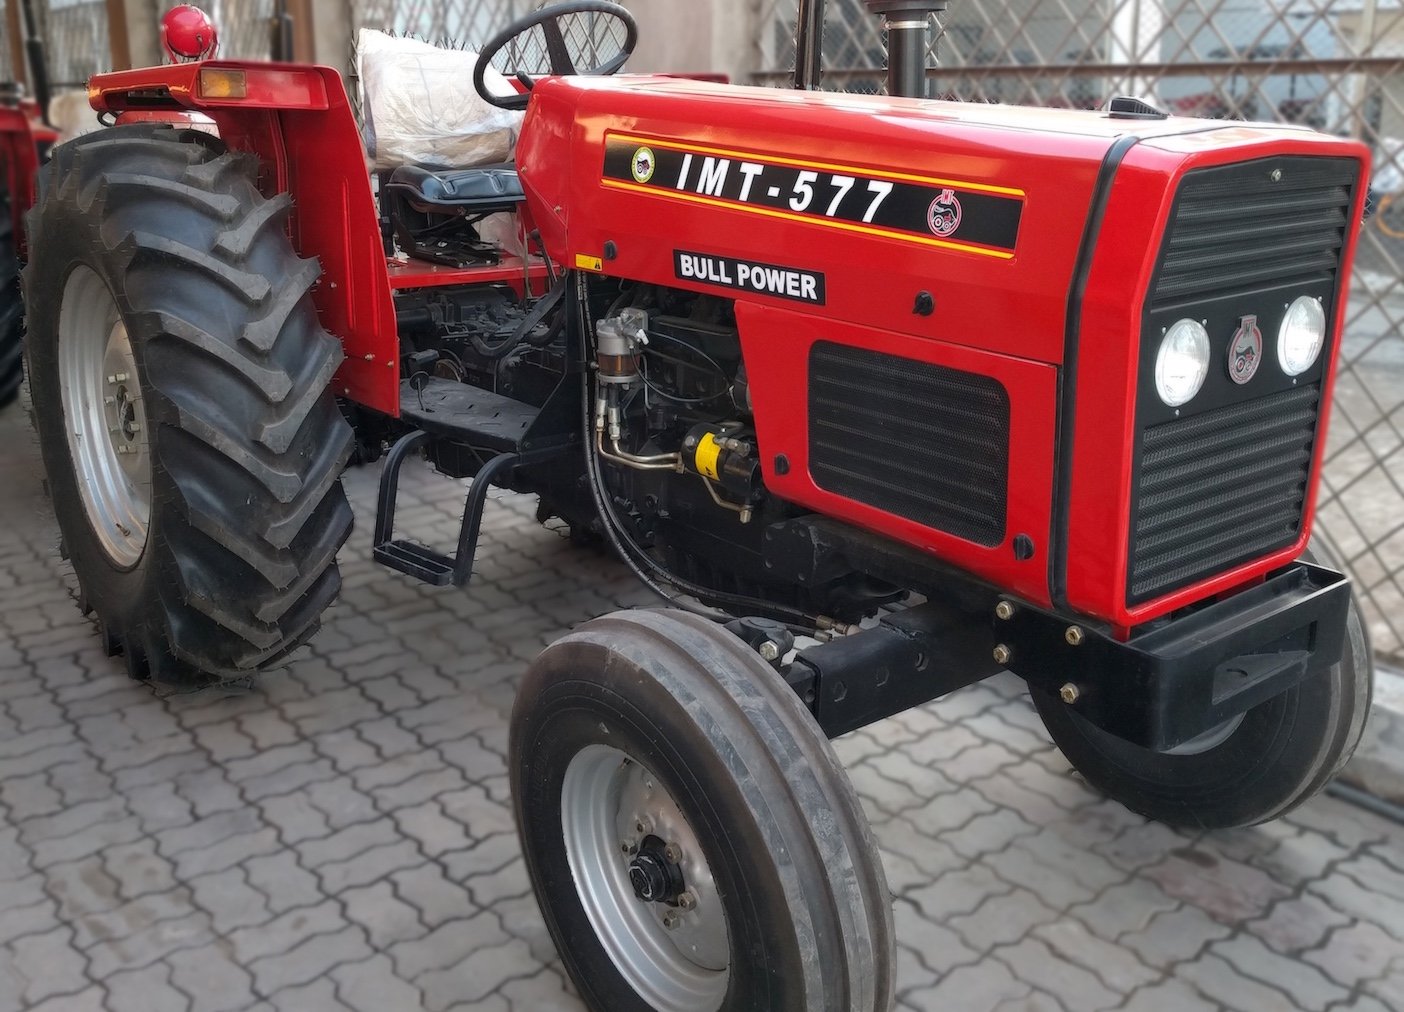 IMT 577 Tractor Price in Pakistan 2022